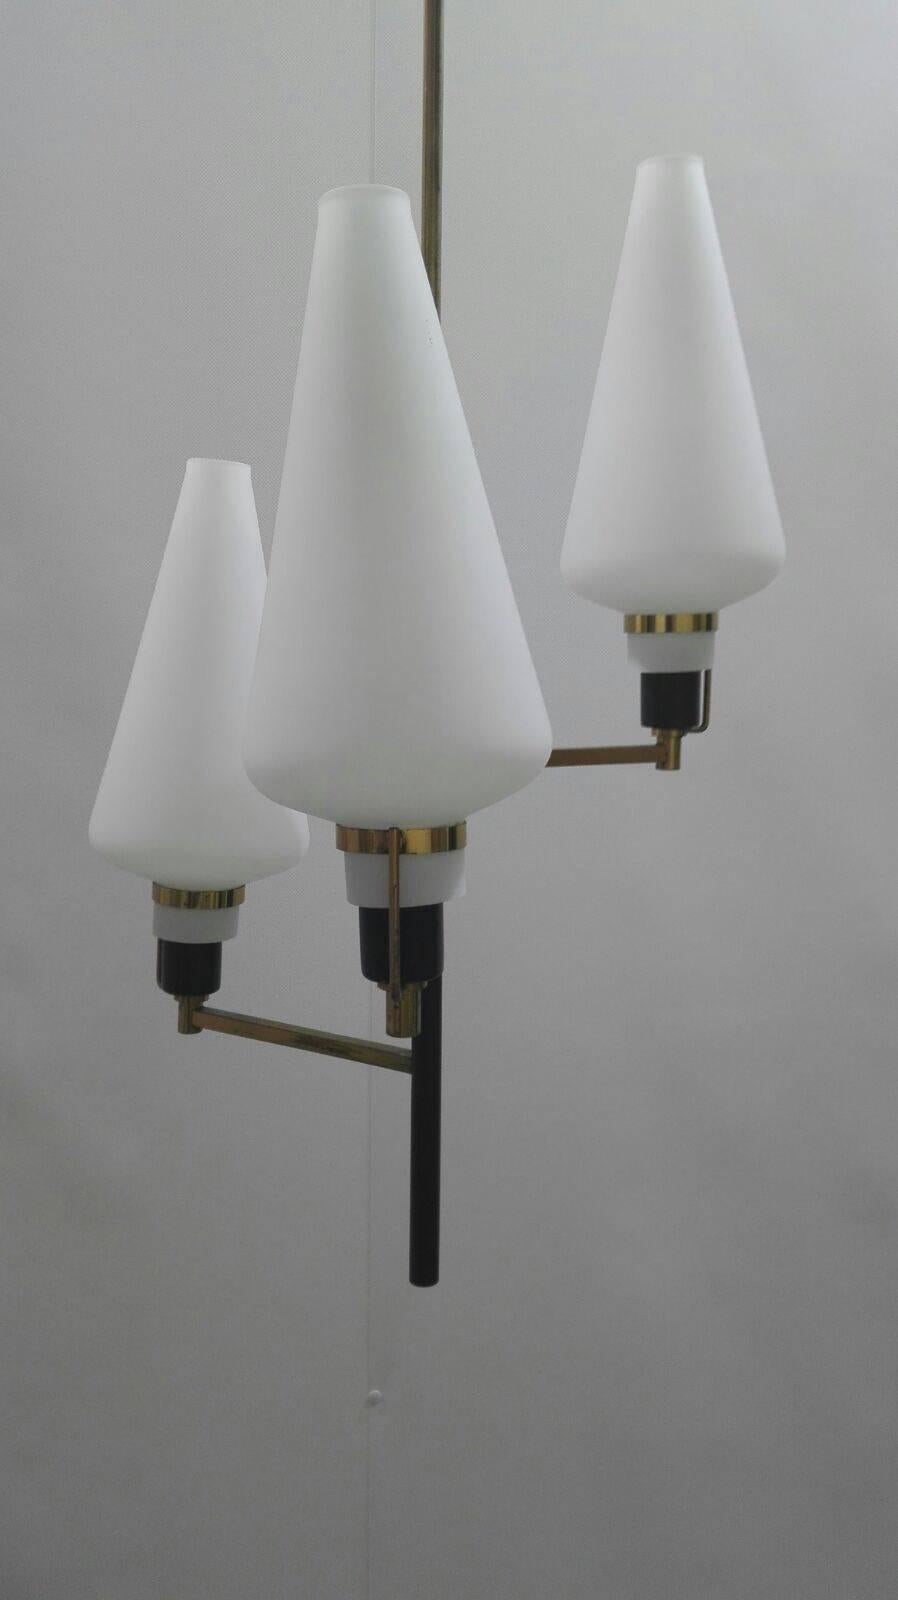 Three-lamp chandelier with brass finish and opal glass shades.